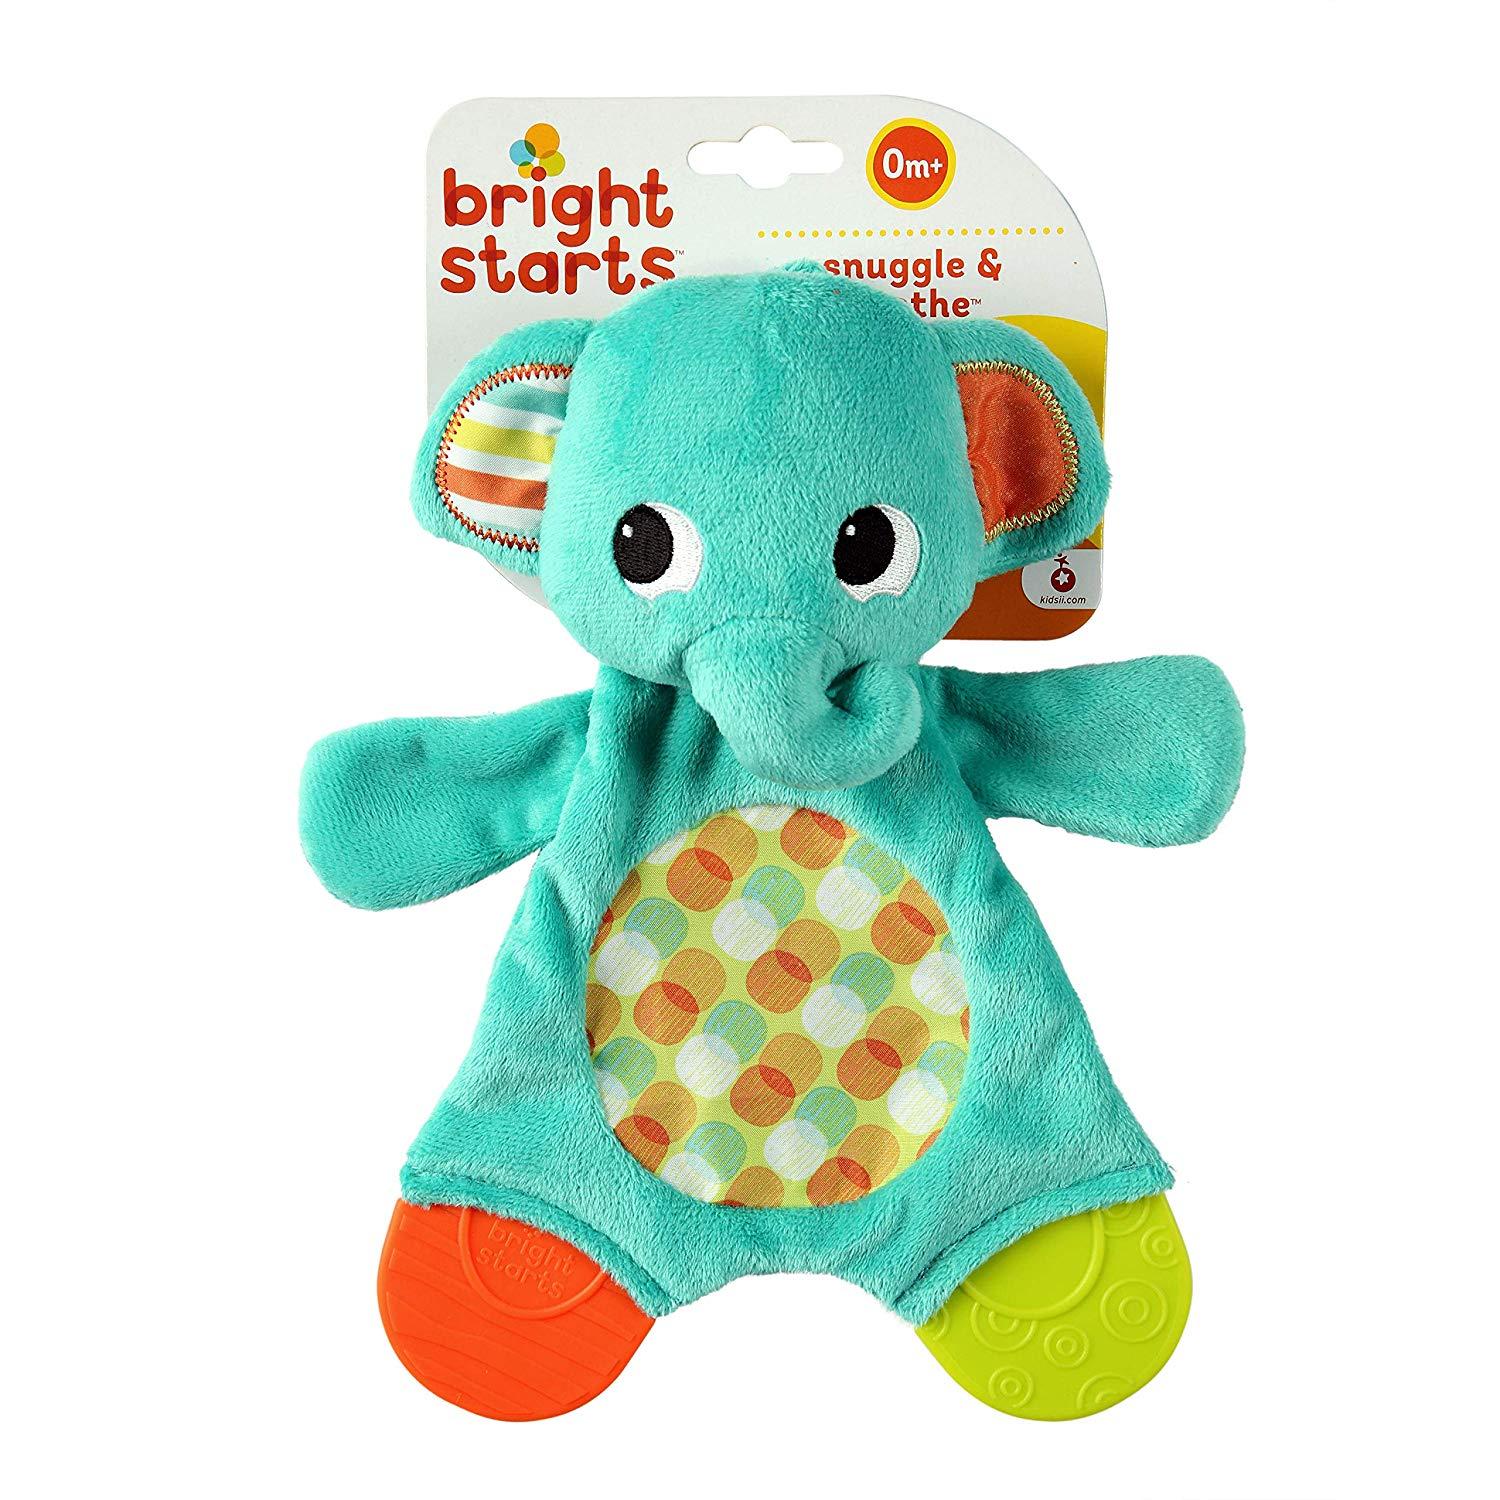 bright starts snuggle teether